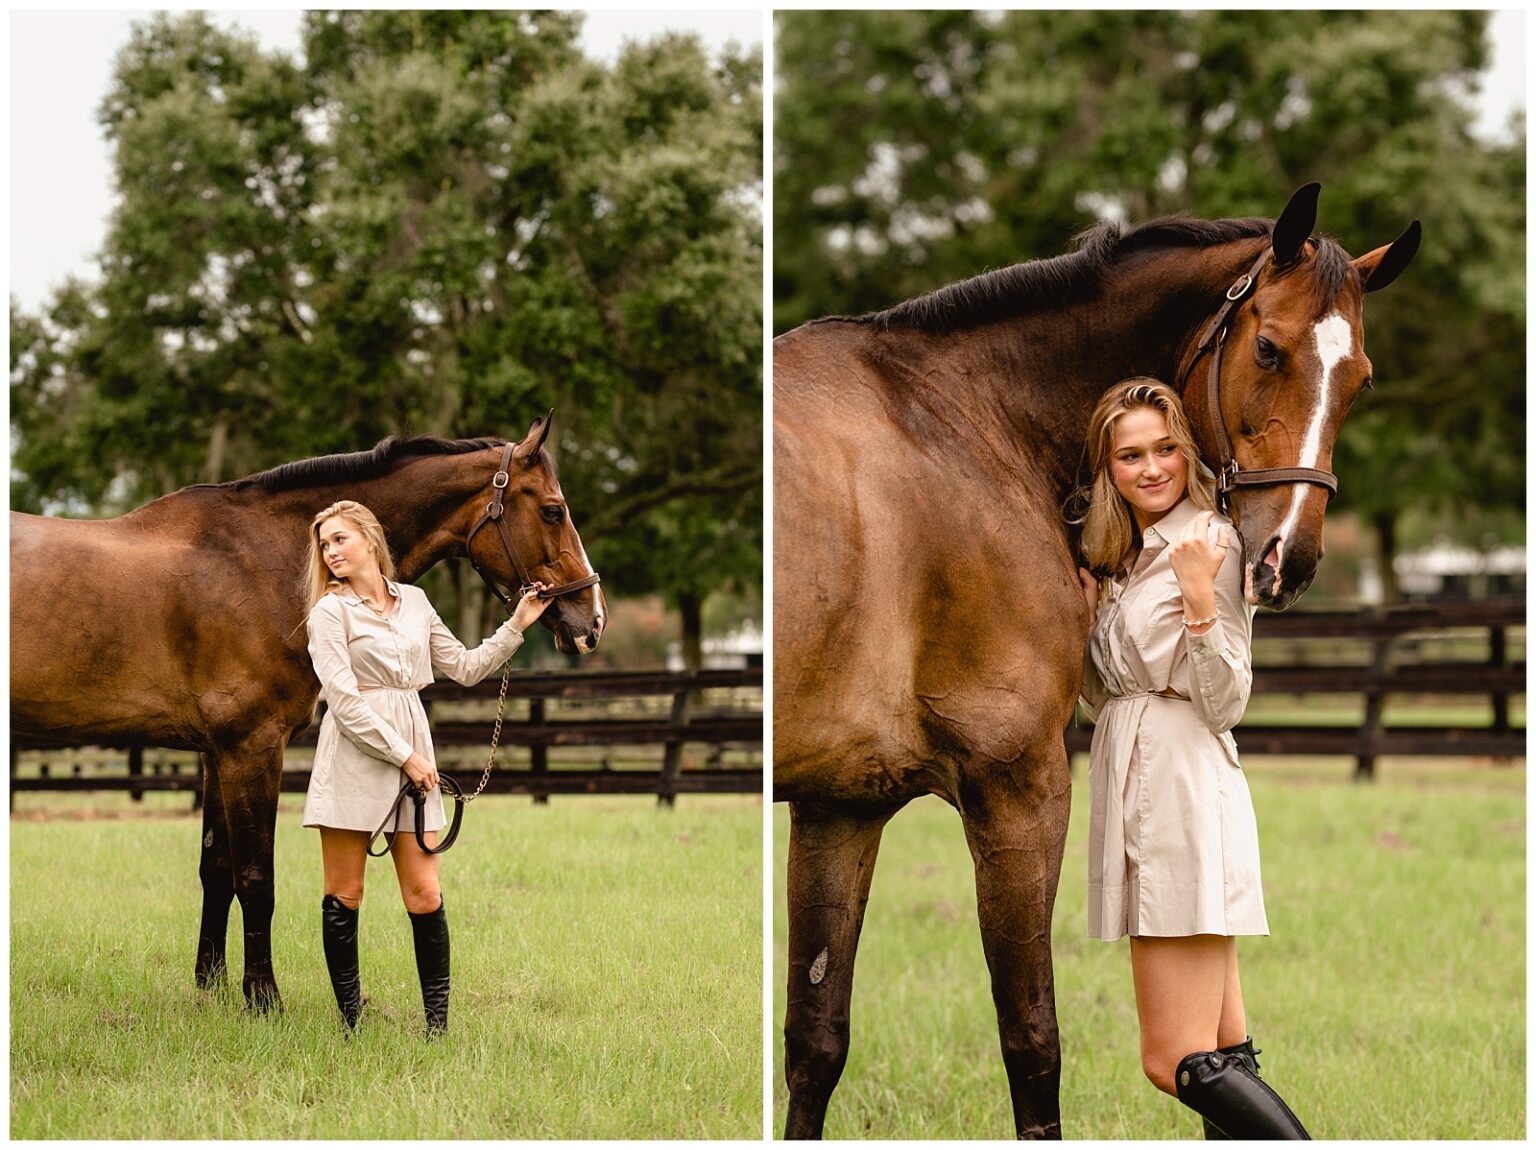 Ocala photoshoot with Horse and Rider. Equestrian styled outfit with dress from Odette Boutique, paired with tall boots.